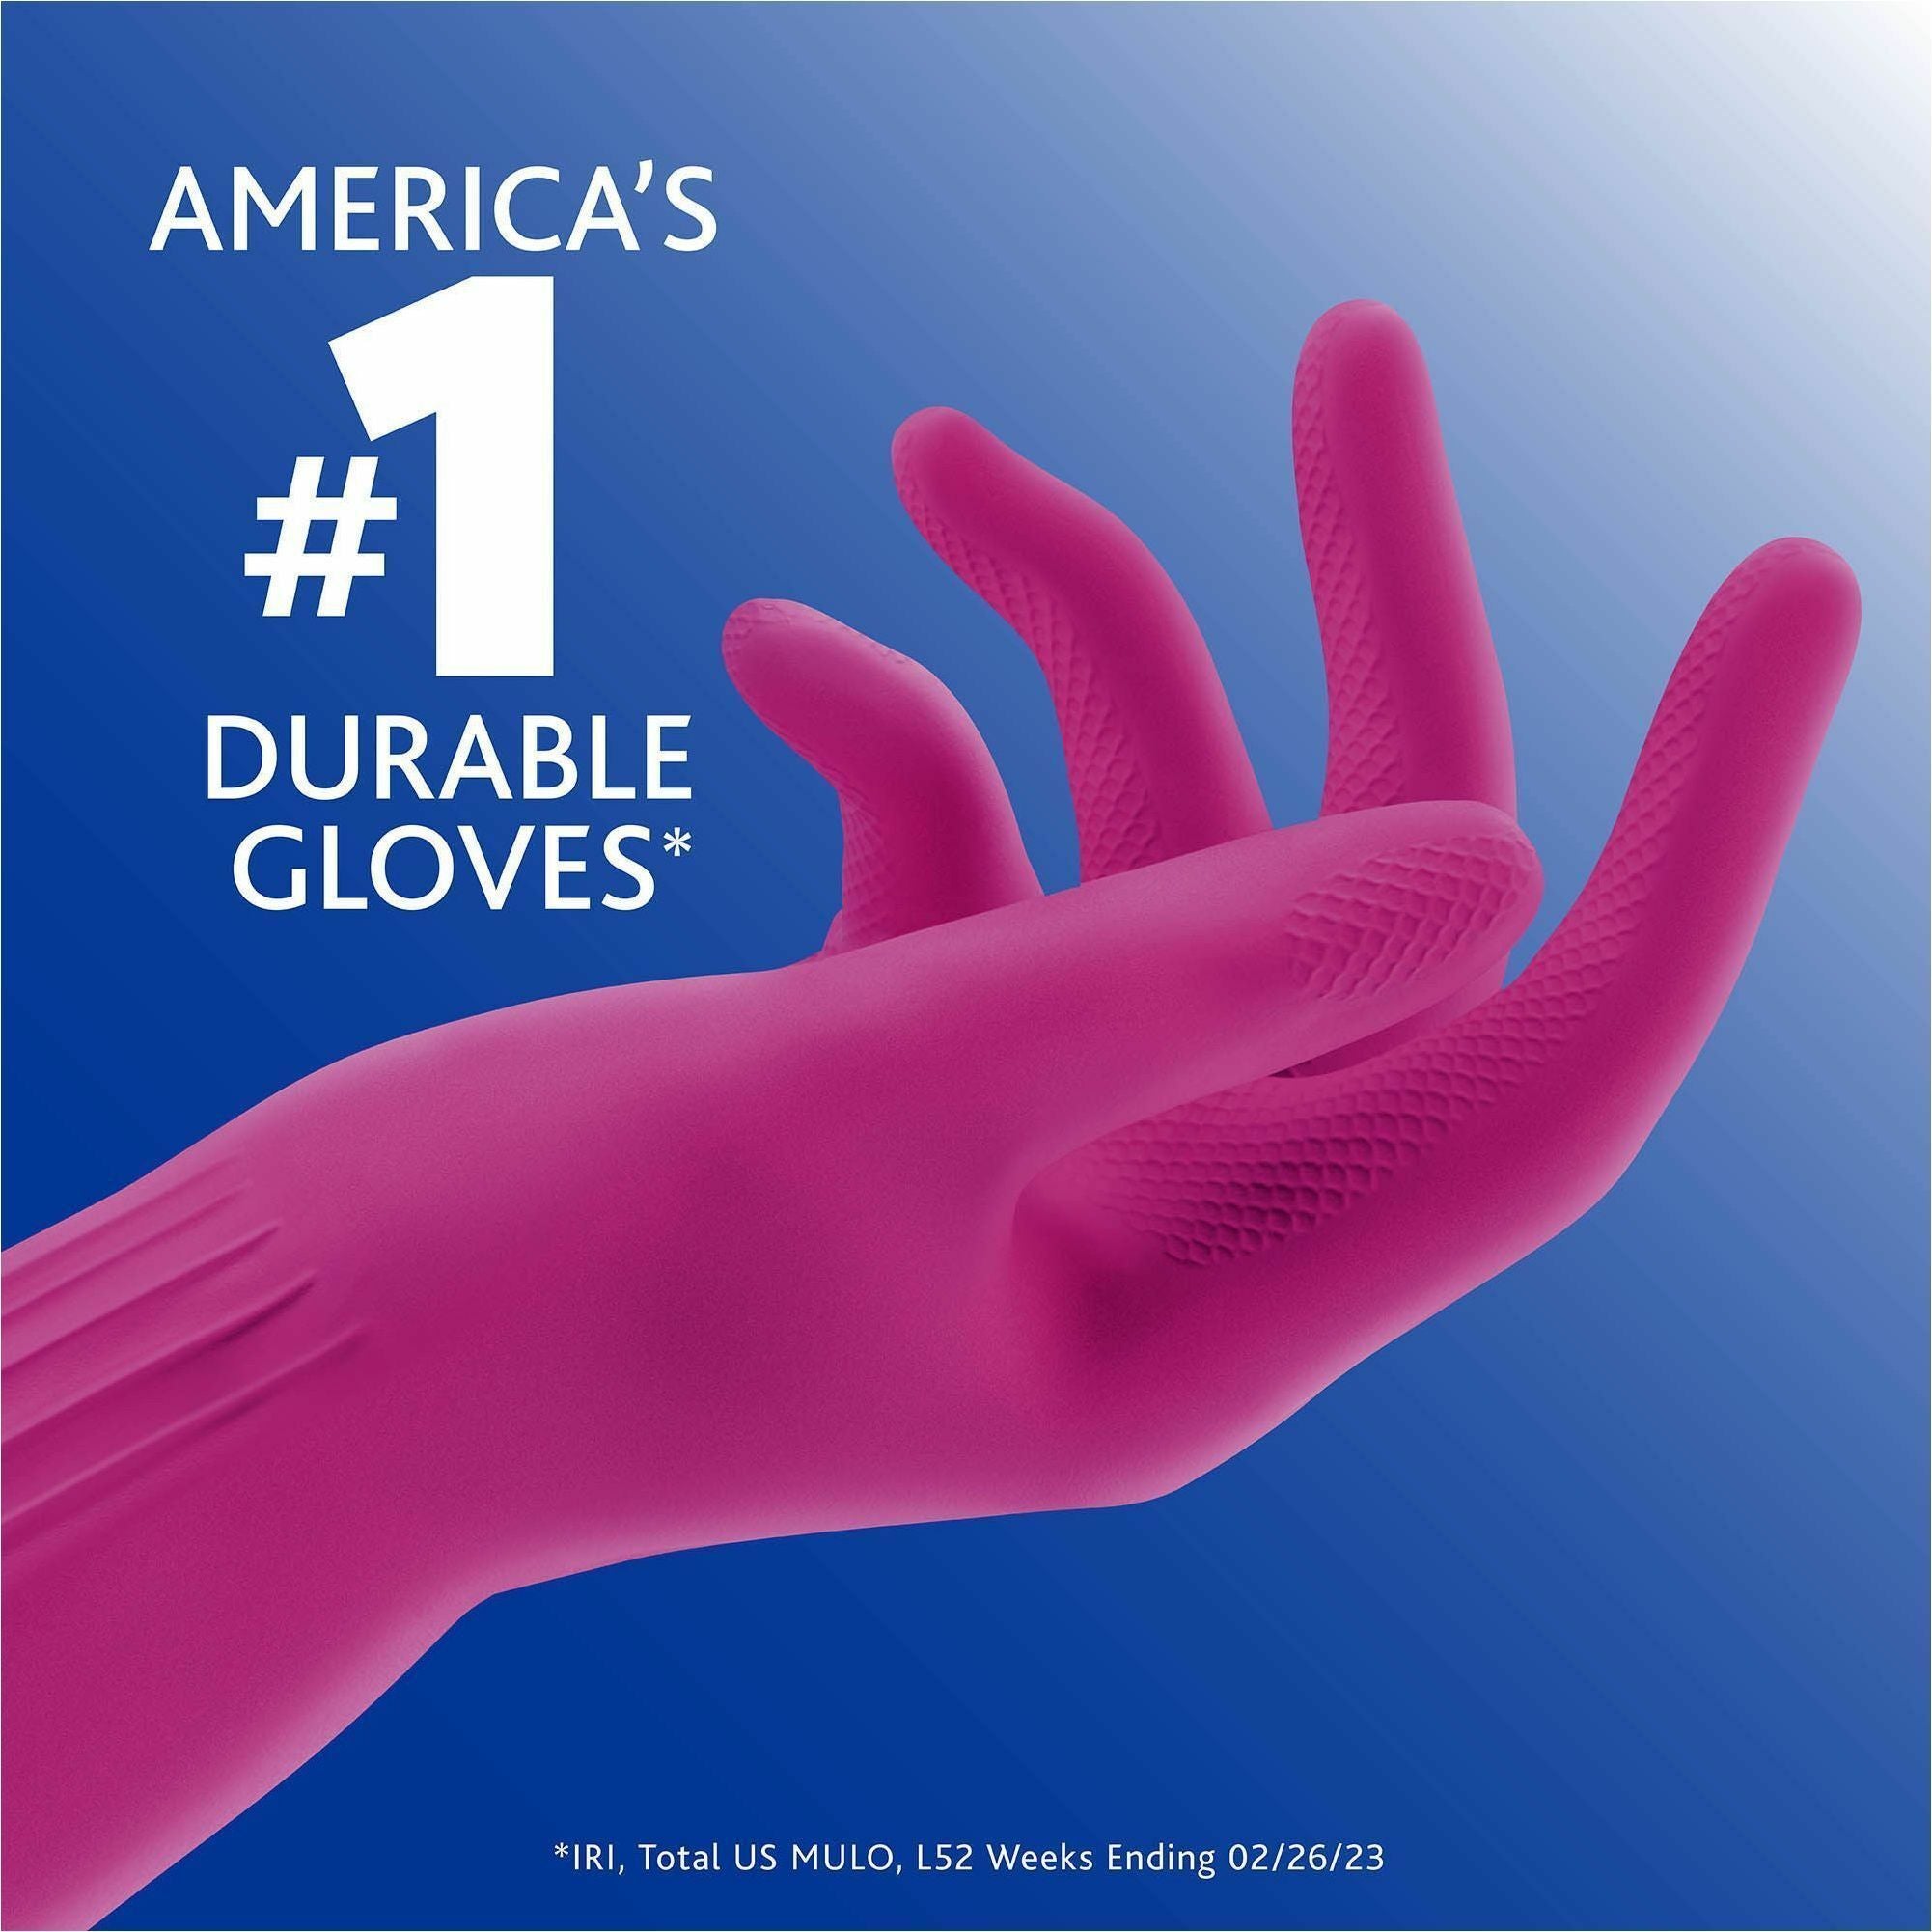 o-cedar-playtex-living-gloves-chemical-bacteria-protection-medium-size-latex-neoprene-nitrile-pink-anti-microbial-reusable-durable-comfortable-odor-resistant-textured-palm-textured-fingertip-for-household-cleaning-2-pair-1_fhp166119 - 4